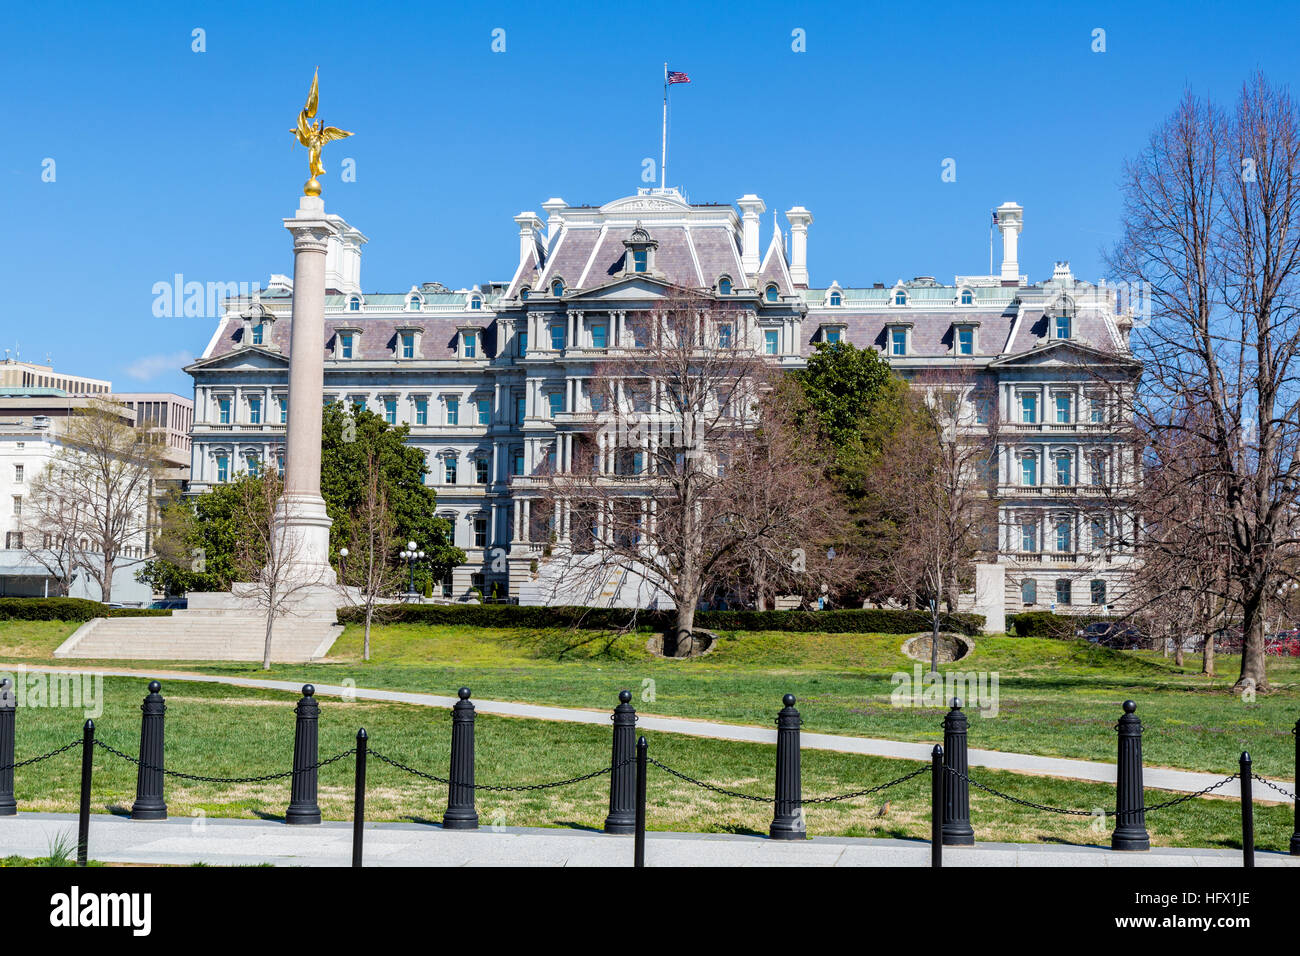 Eisenhower Executive Office Building, Washington, D.C.  Formerly the Old Executive Office Building.  Vice President's Office. Stock Photo